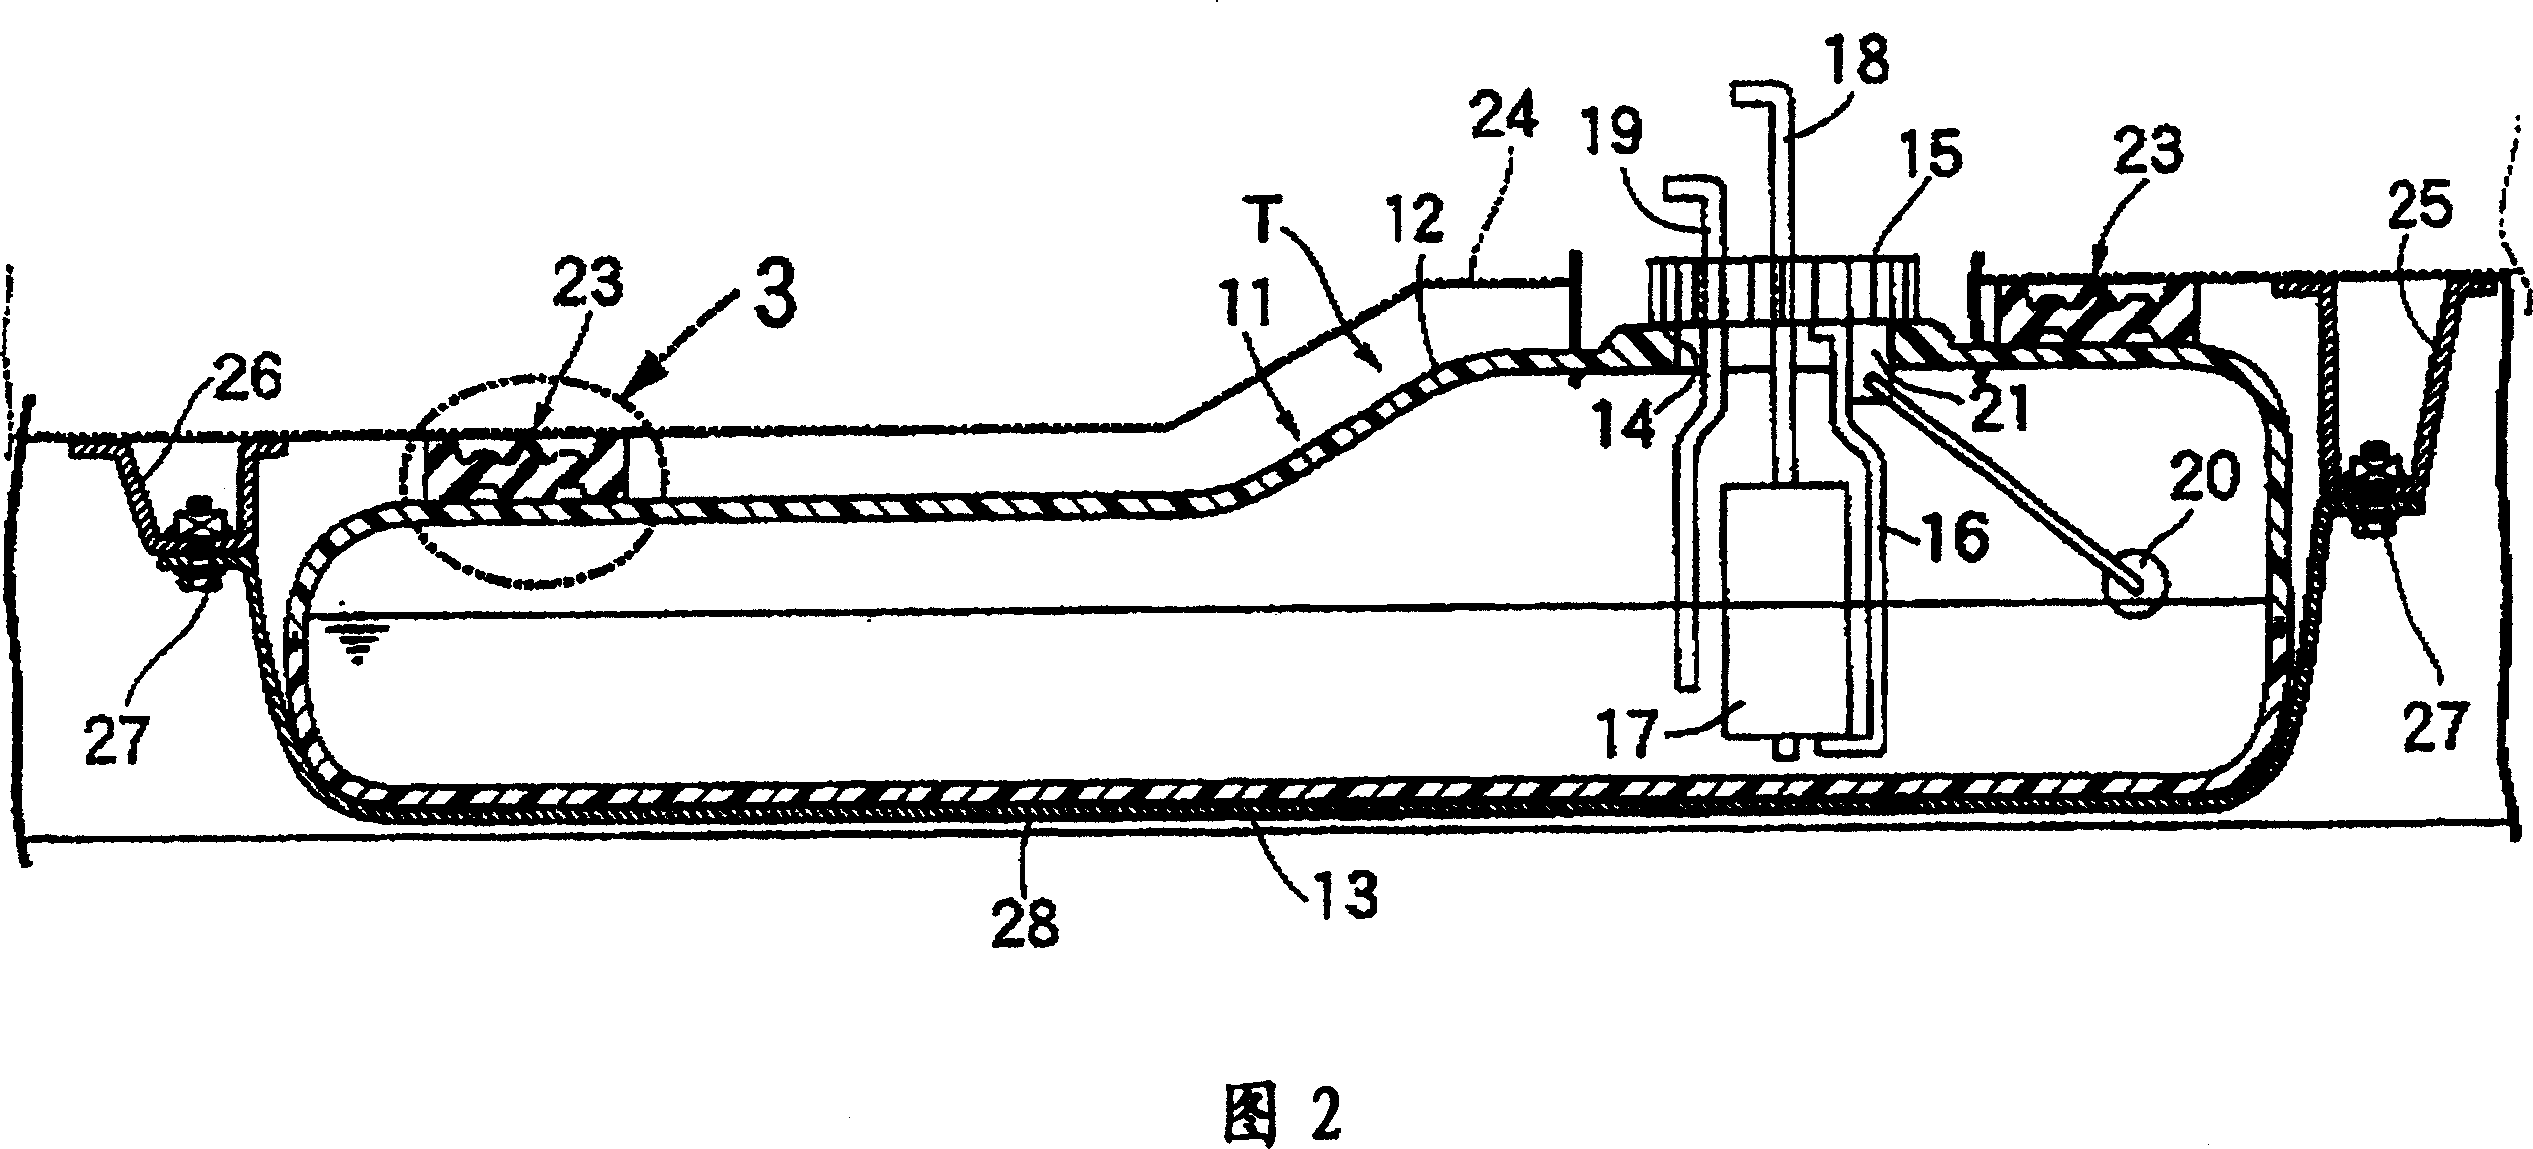 Vibration isolation support structure of fuel tank for vehicle